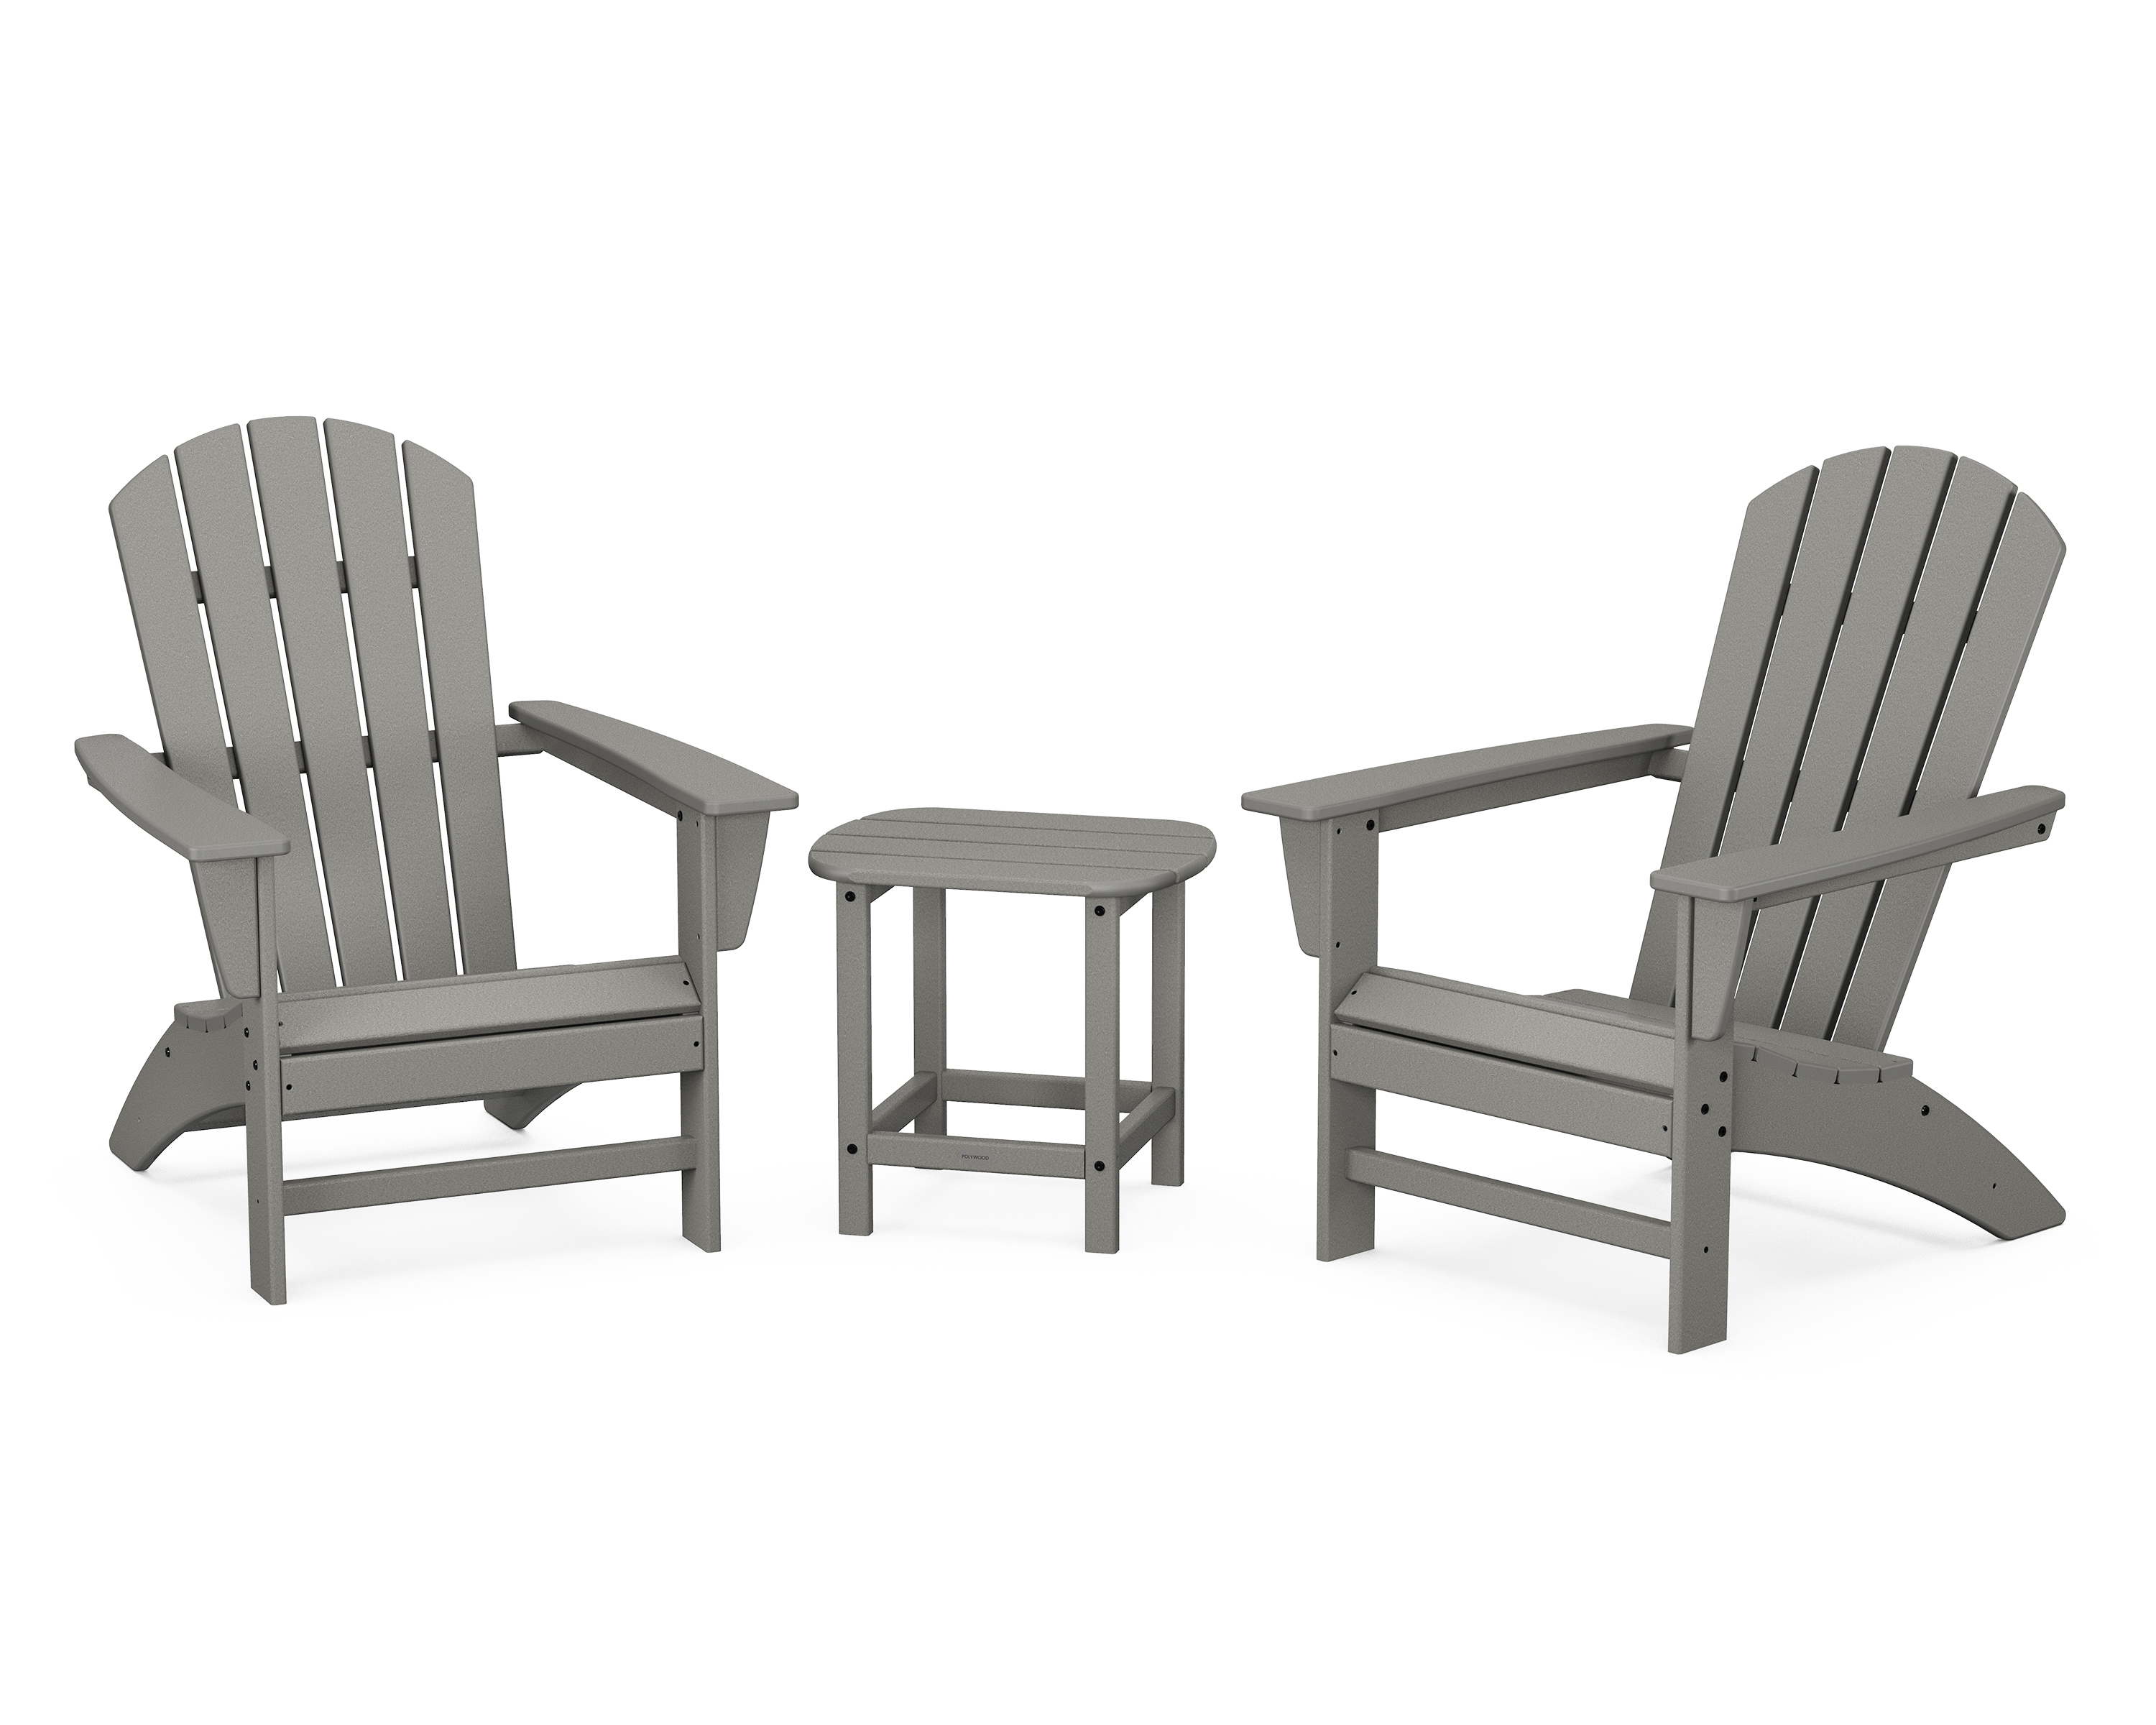 POLYWOOD Nautical 3-Piece Adirondack Set with South Beach 18" Side Table in Slate Grey - image 1 of 1